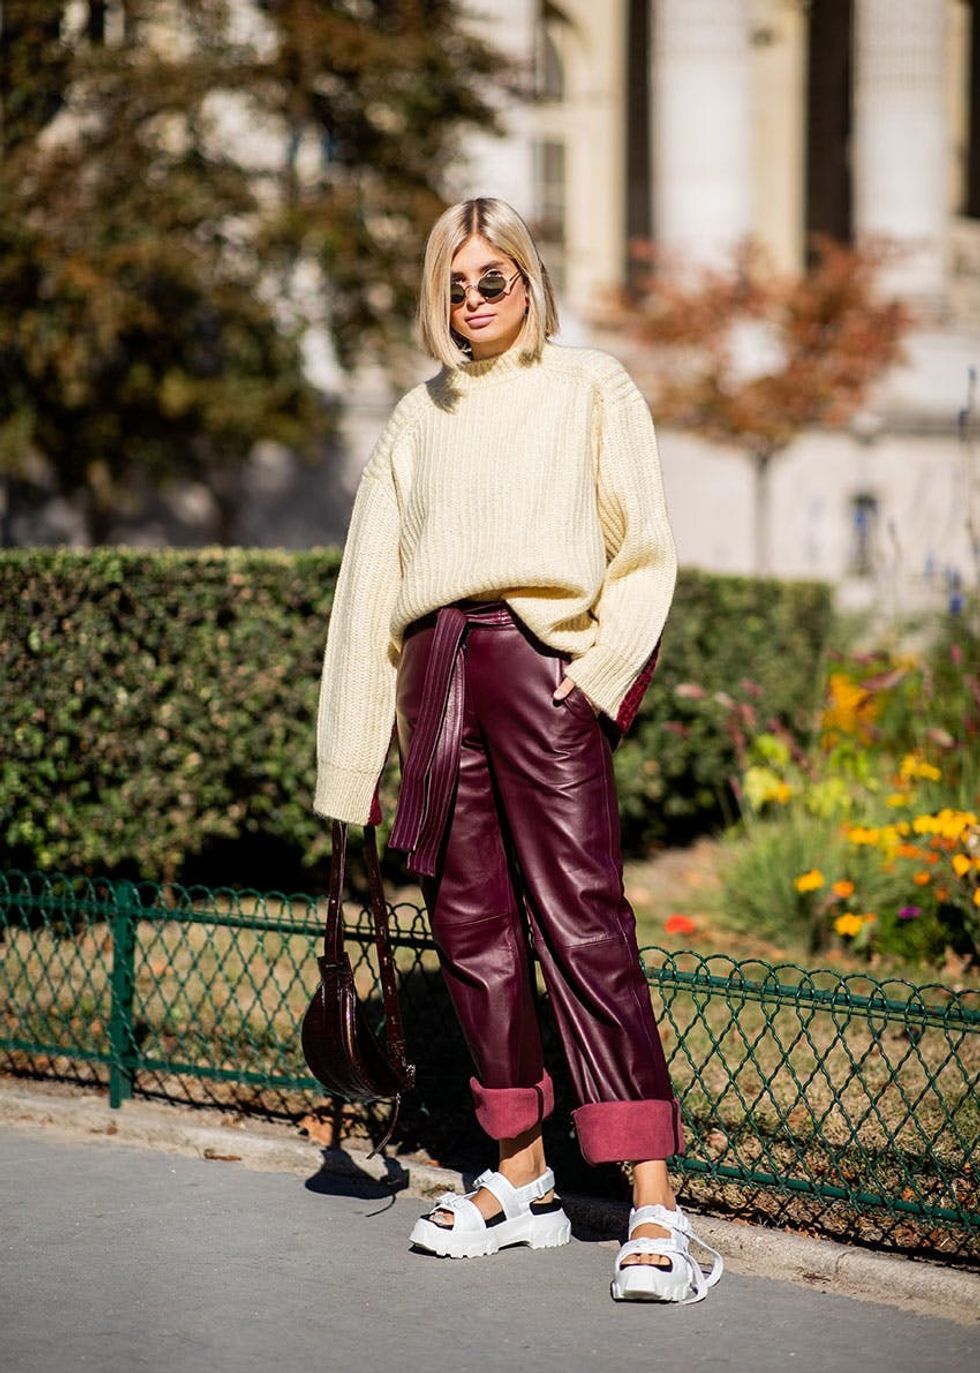 The Shoe Trends That Are In and Out for 2019 - Brit + Co